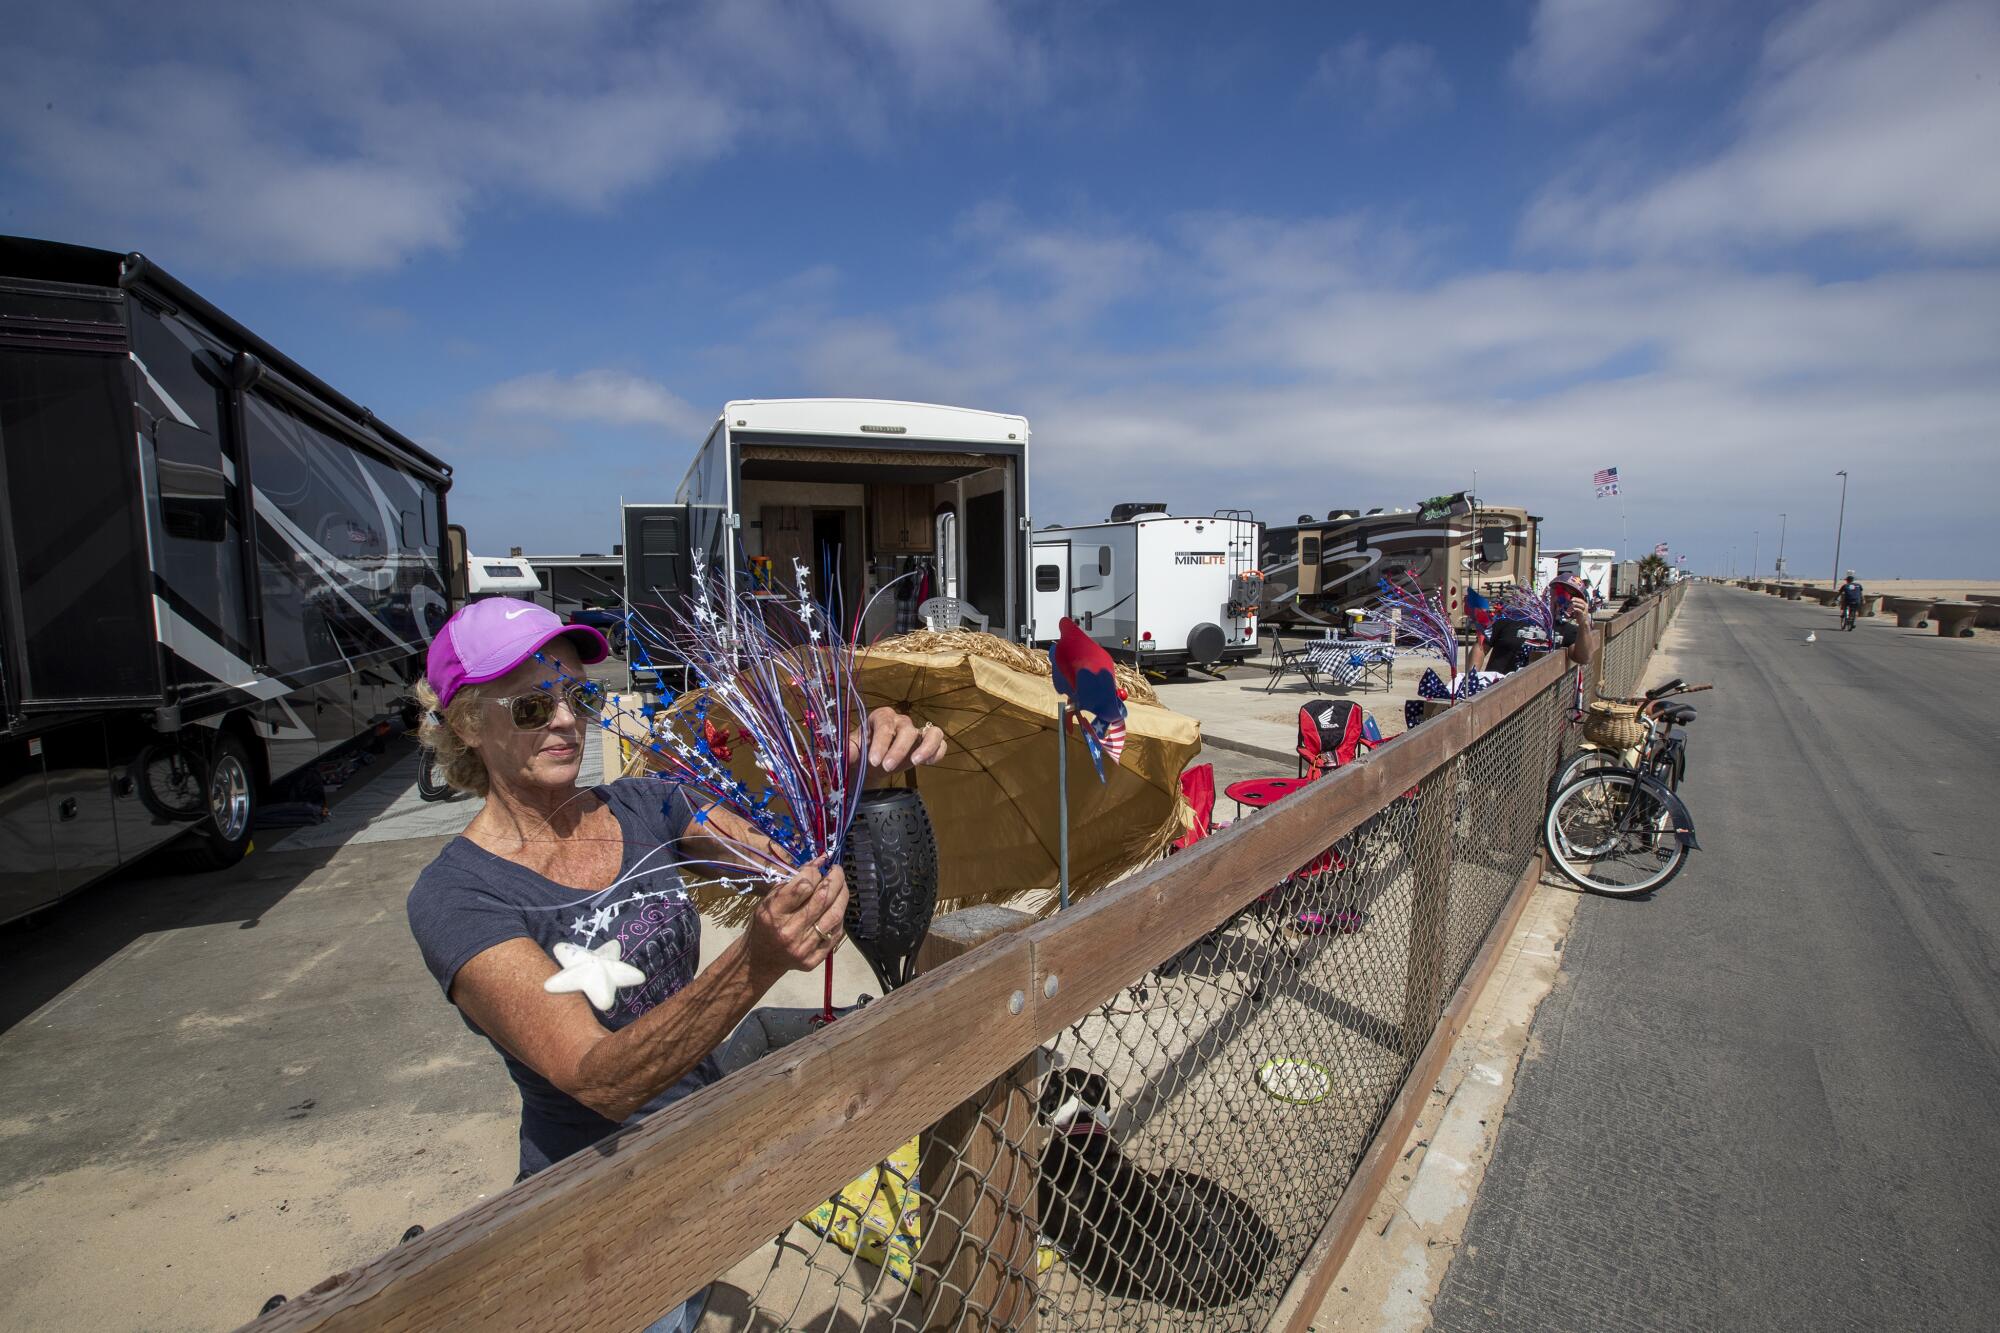 Tami Burnett puts up American flag decorations while at Bolsa Chica State Beach